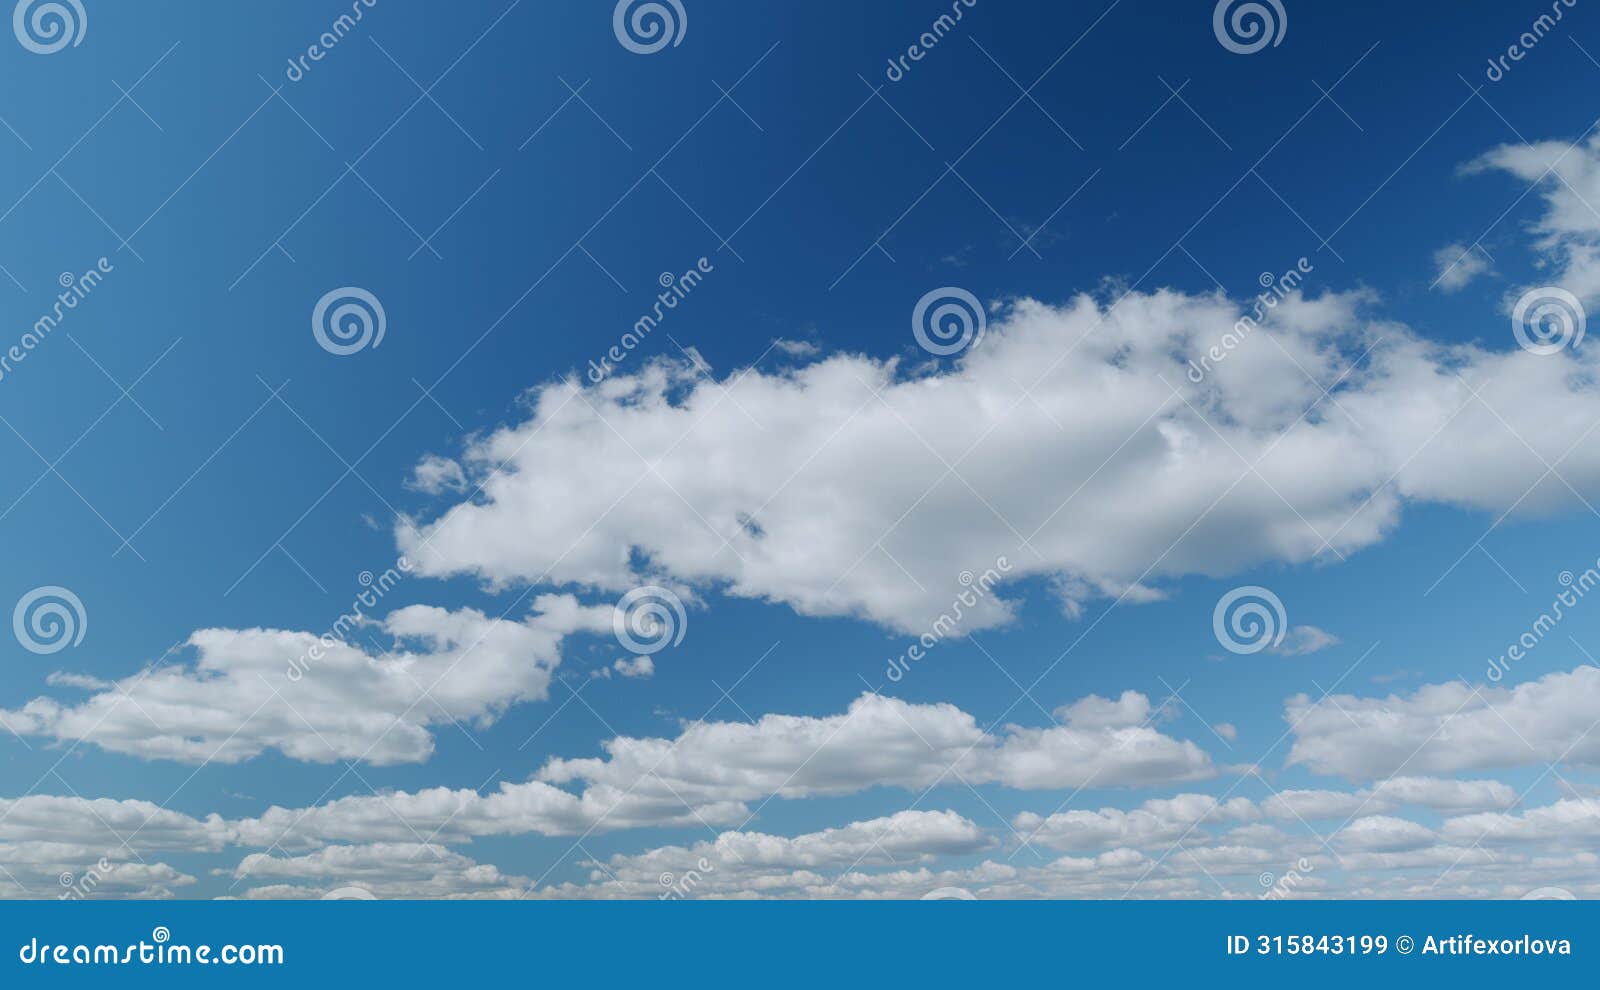 sky with bautiful silky clouds. puffy fluffy stratocumulus and stratus clouds. timelapse.